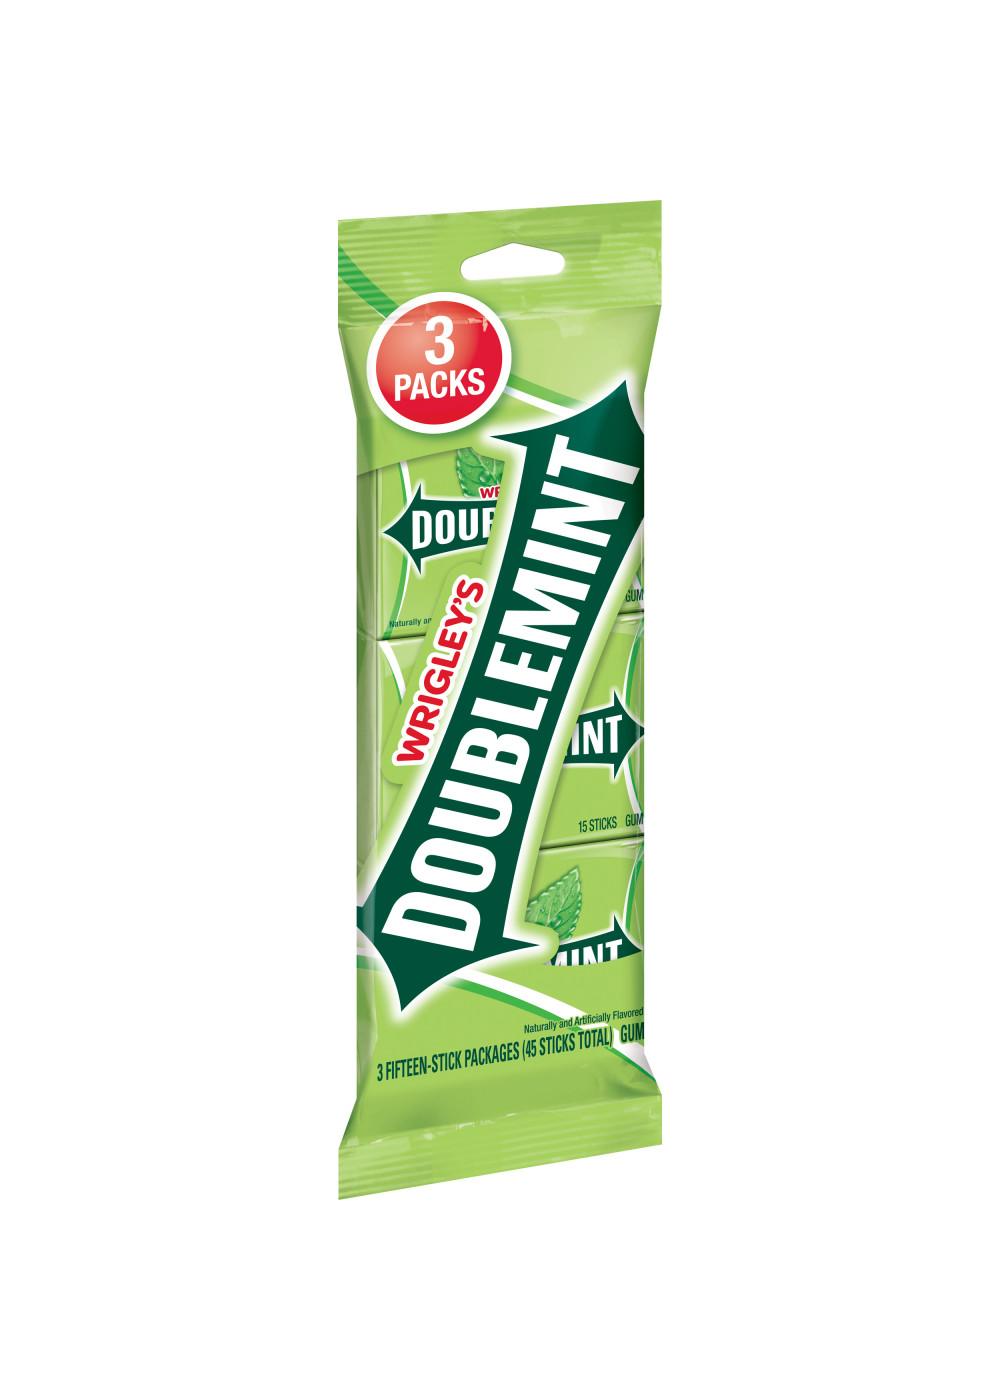 Wrigley's Doublemint Chewing Gum Value Pack, 3 Pk; image 1 of 7